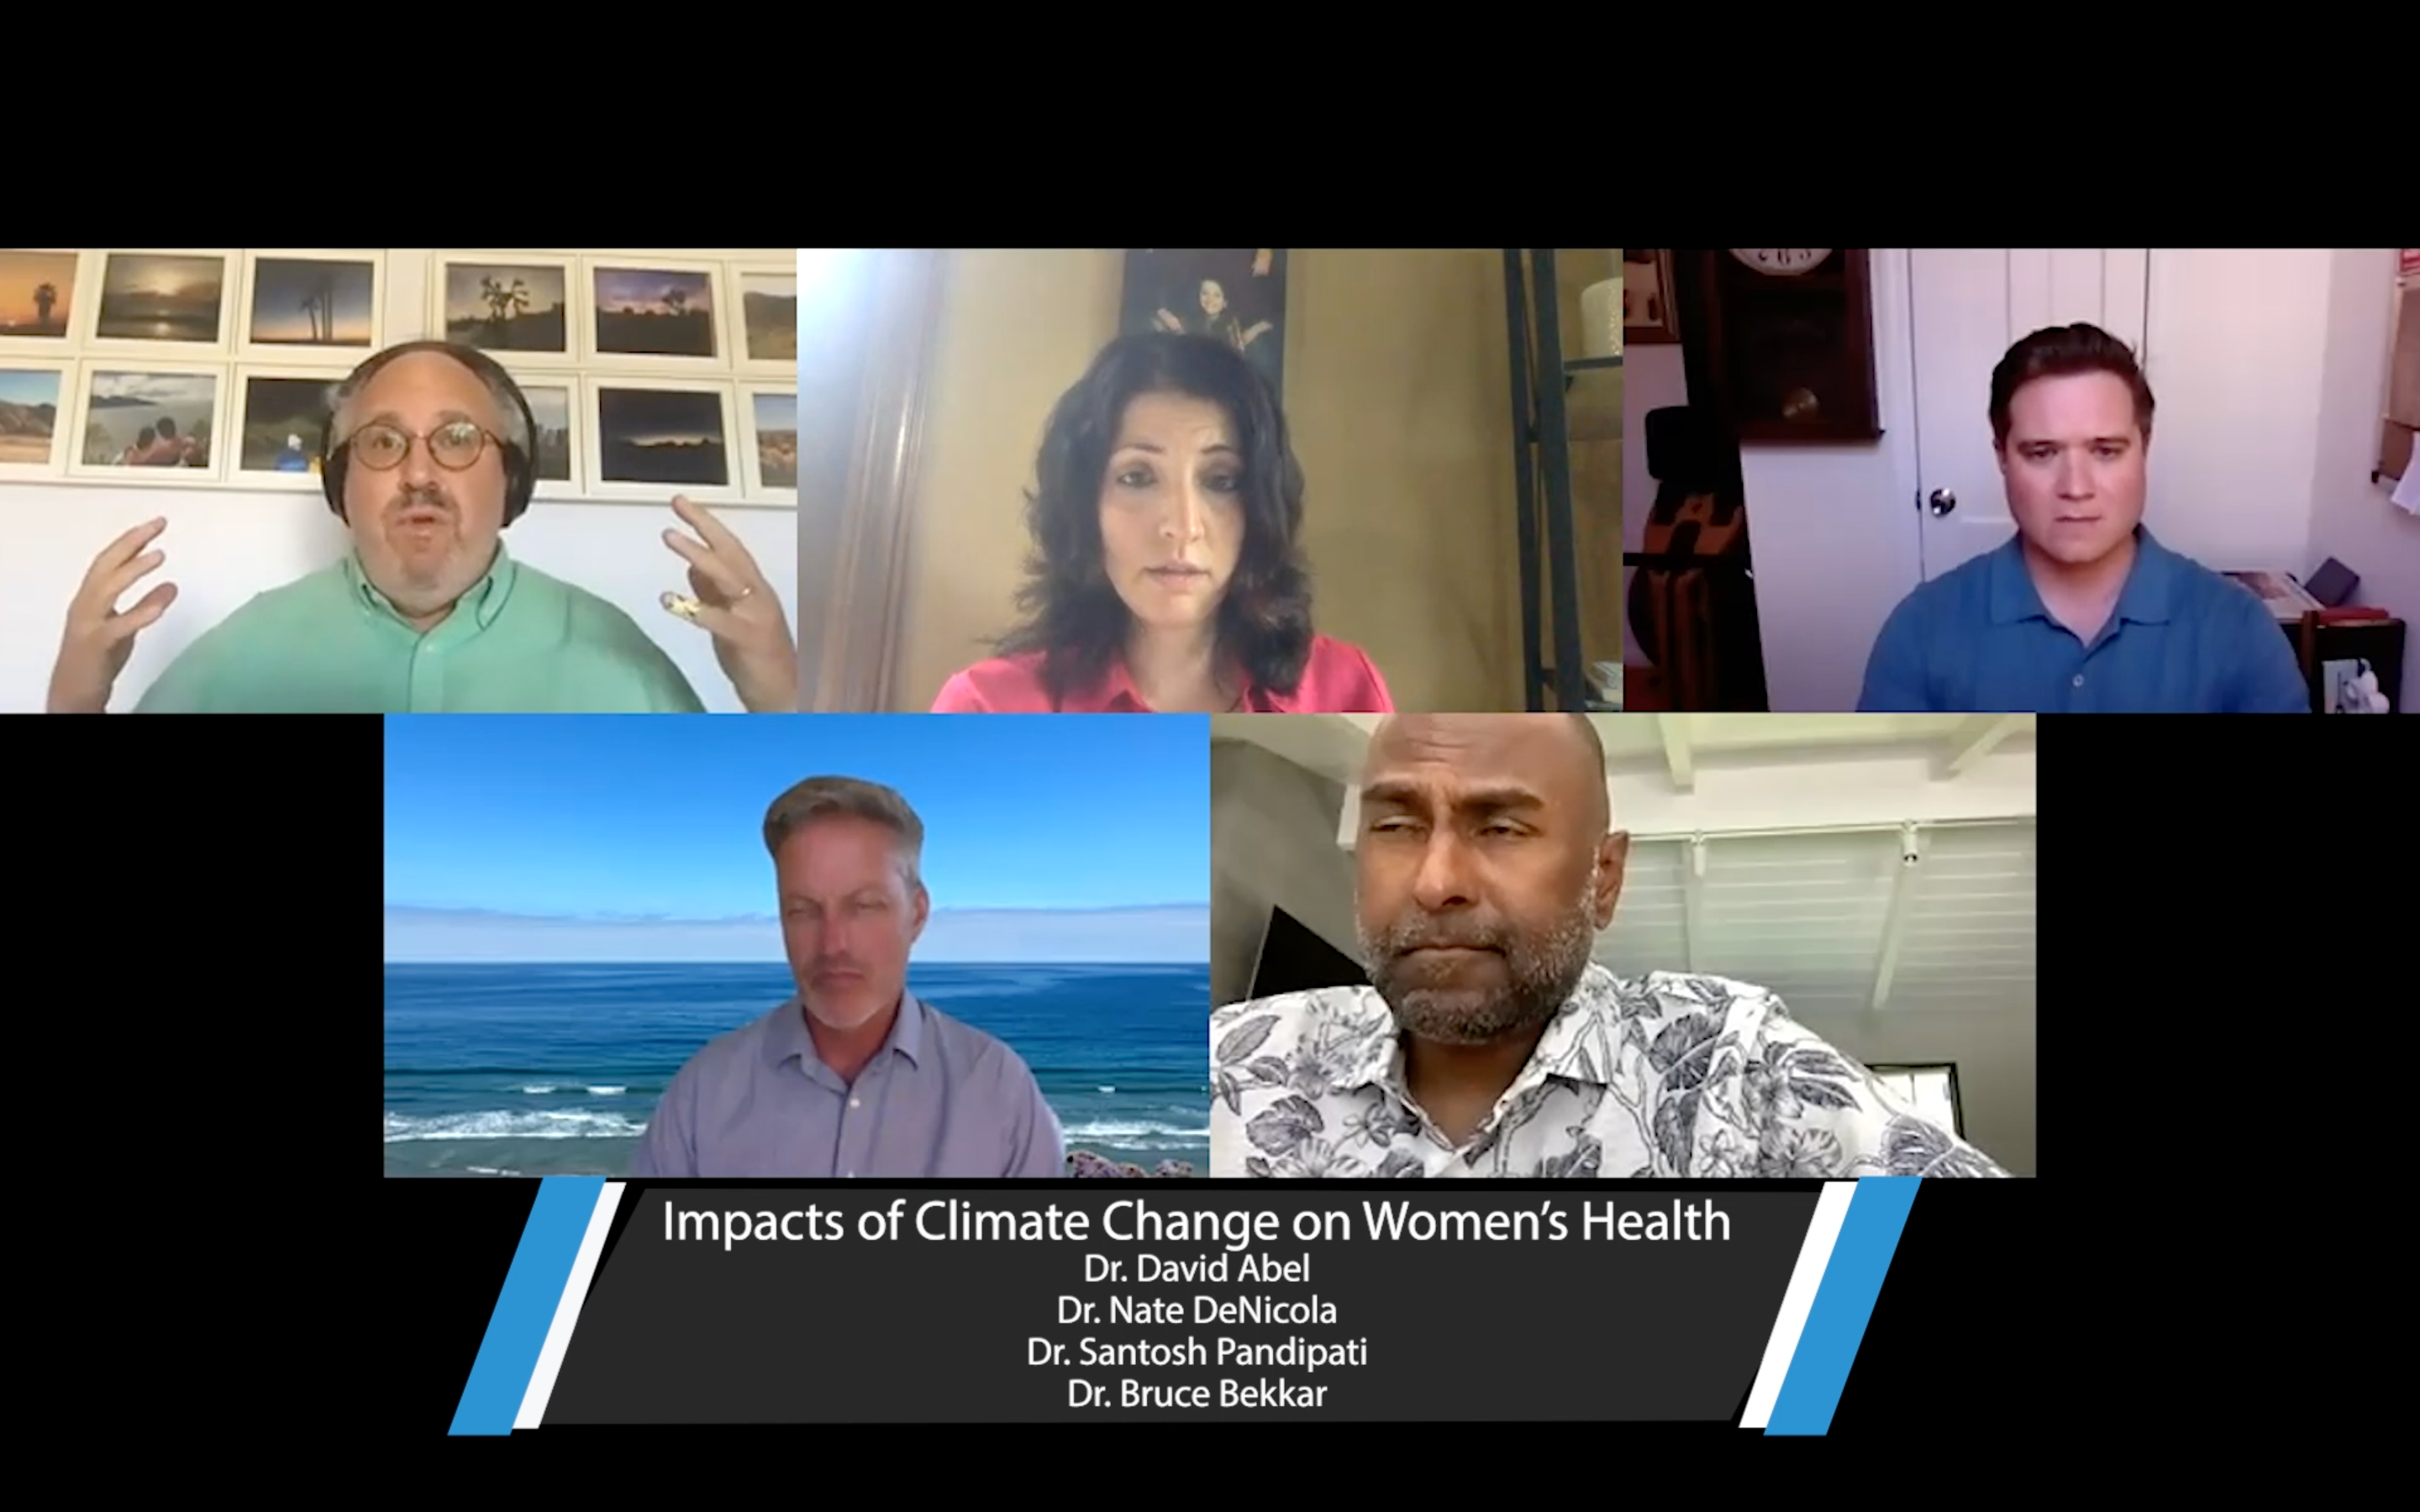 Panel discussion: Impacts of climate change on women's health